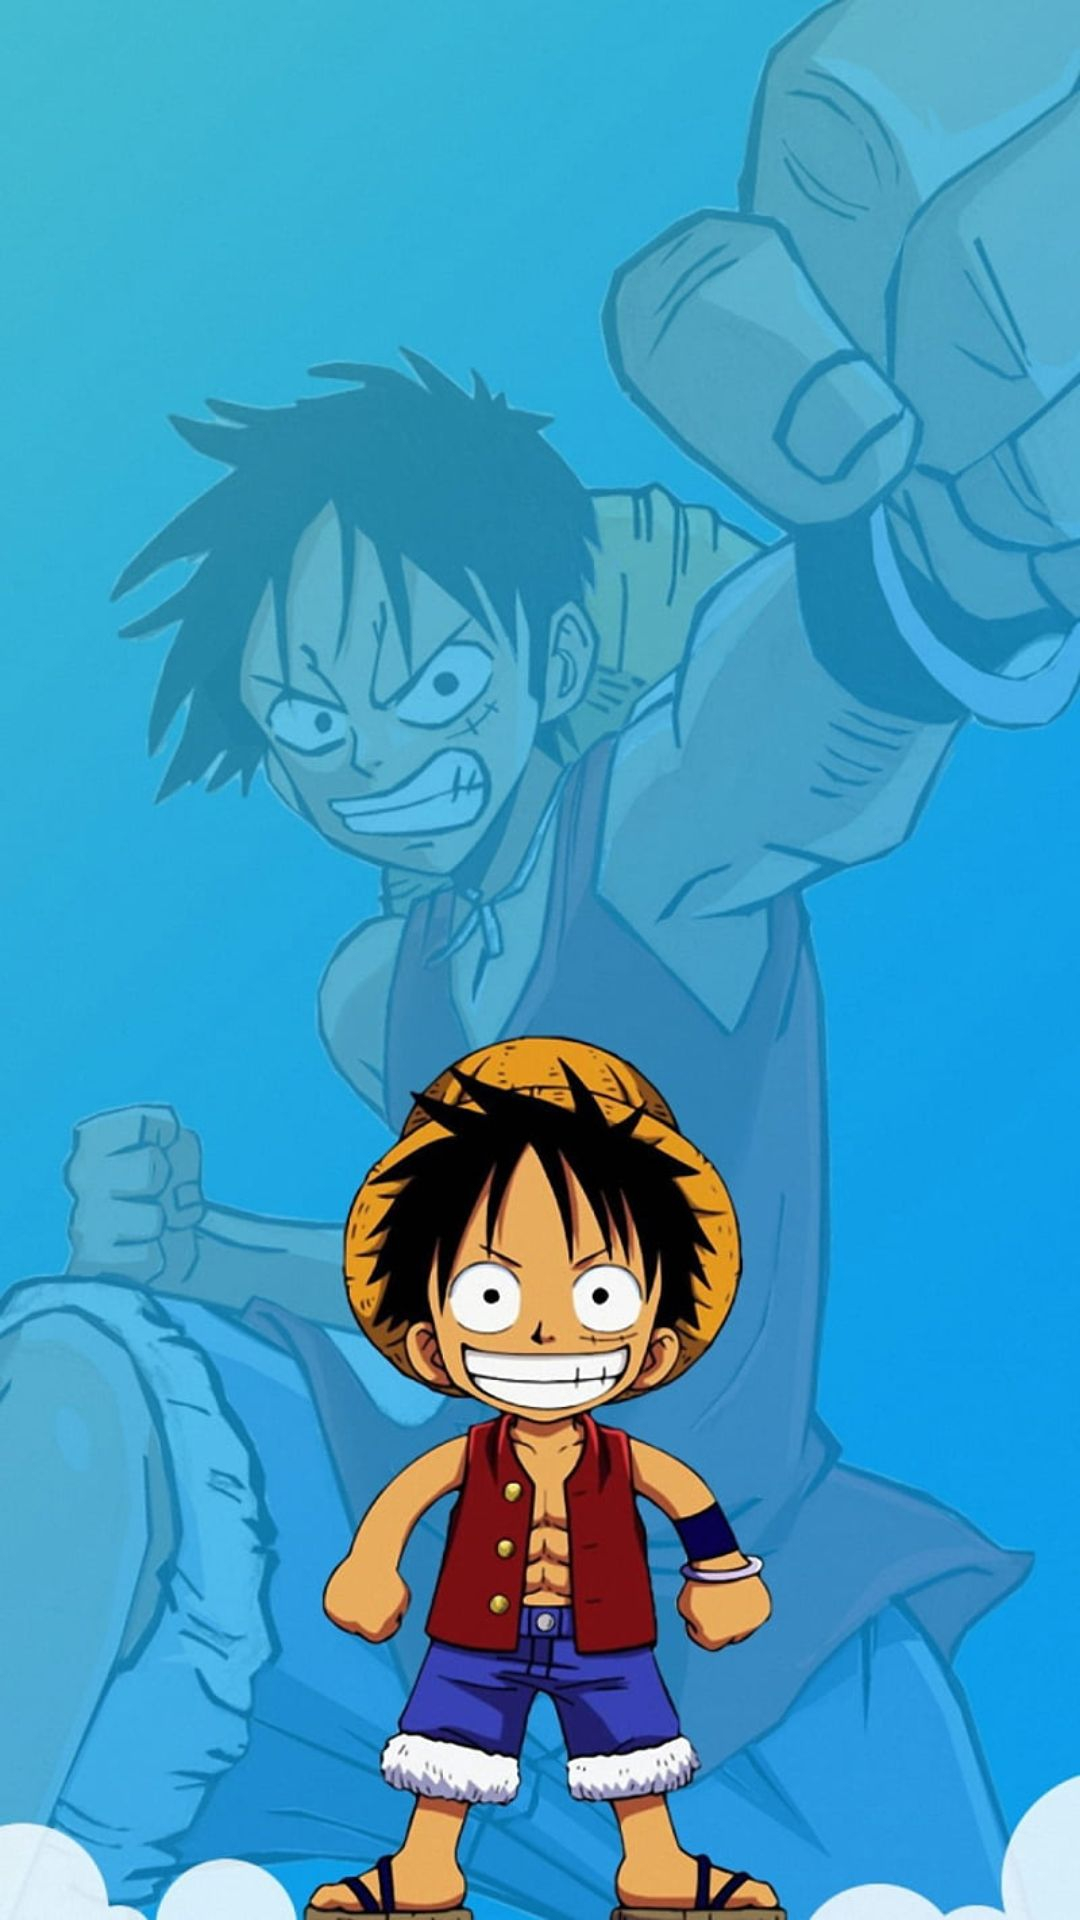 1080x1920 One Piece Phone Wallpapers Visit To Download High Quality One Piece Phone Wallpapers